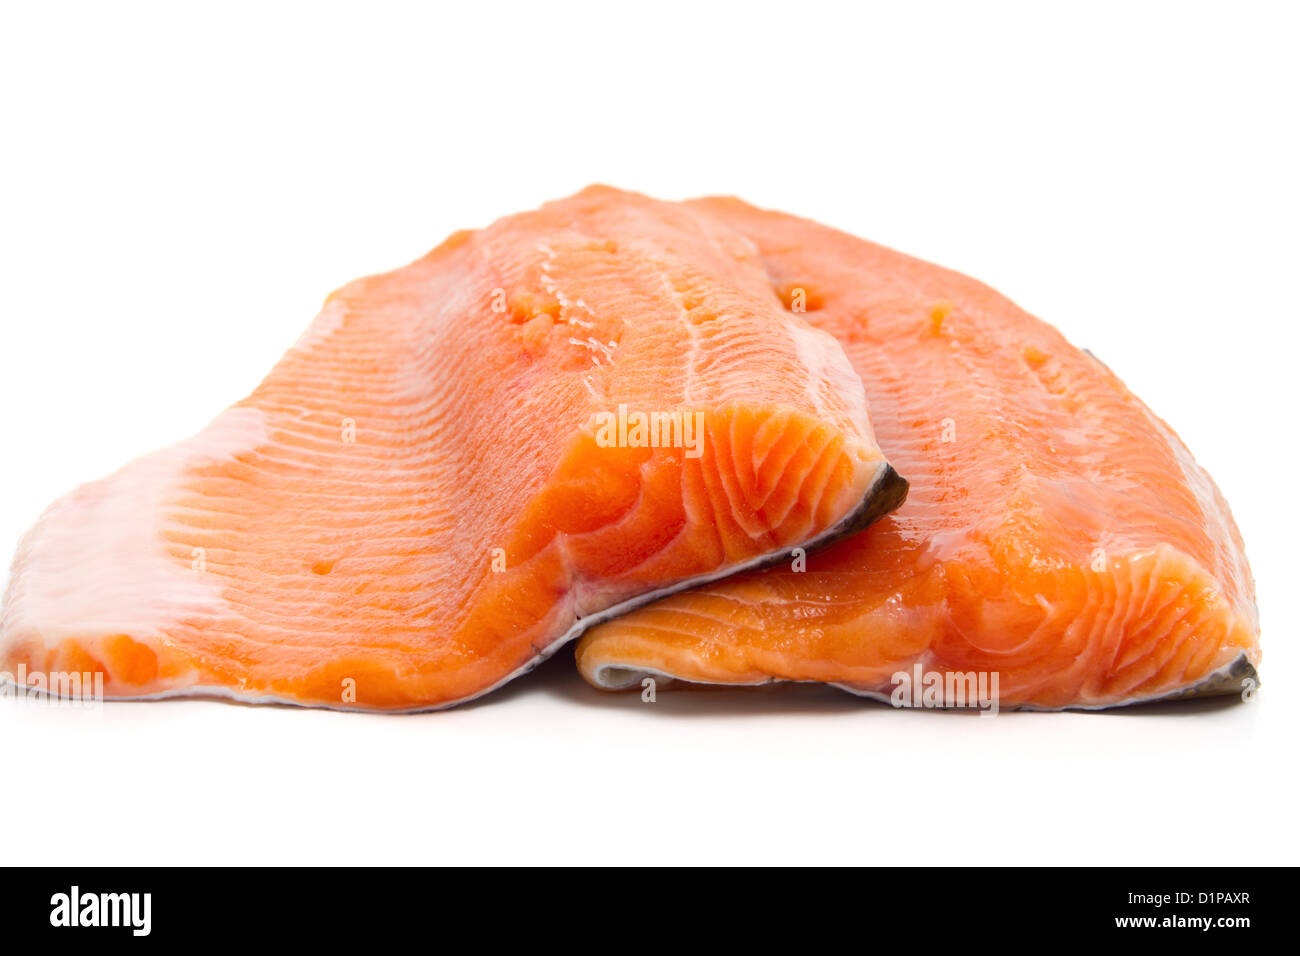 detail of salmon trout fillets over white background Stock Photo